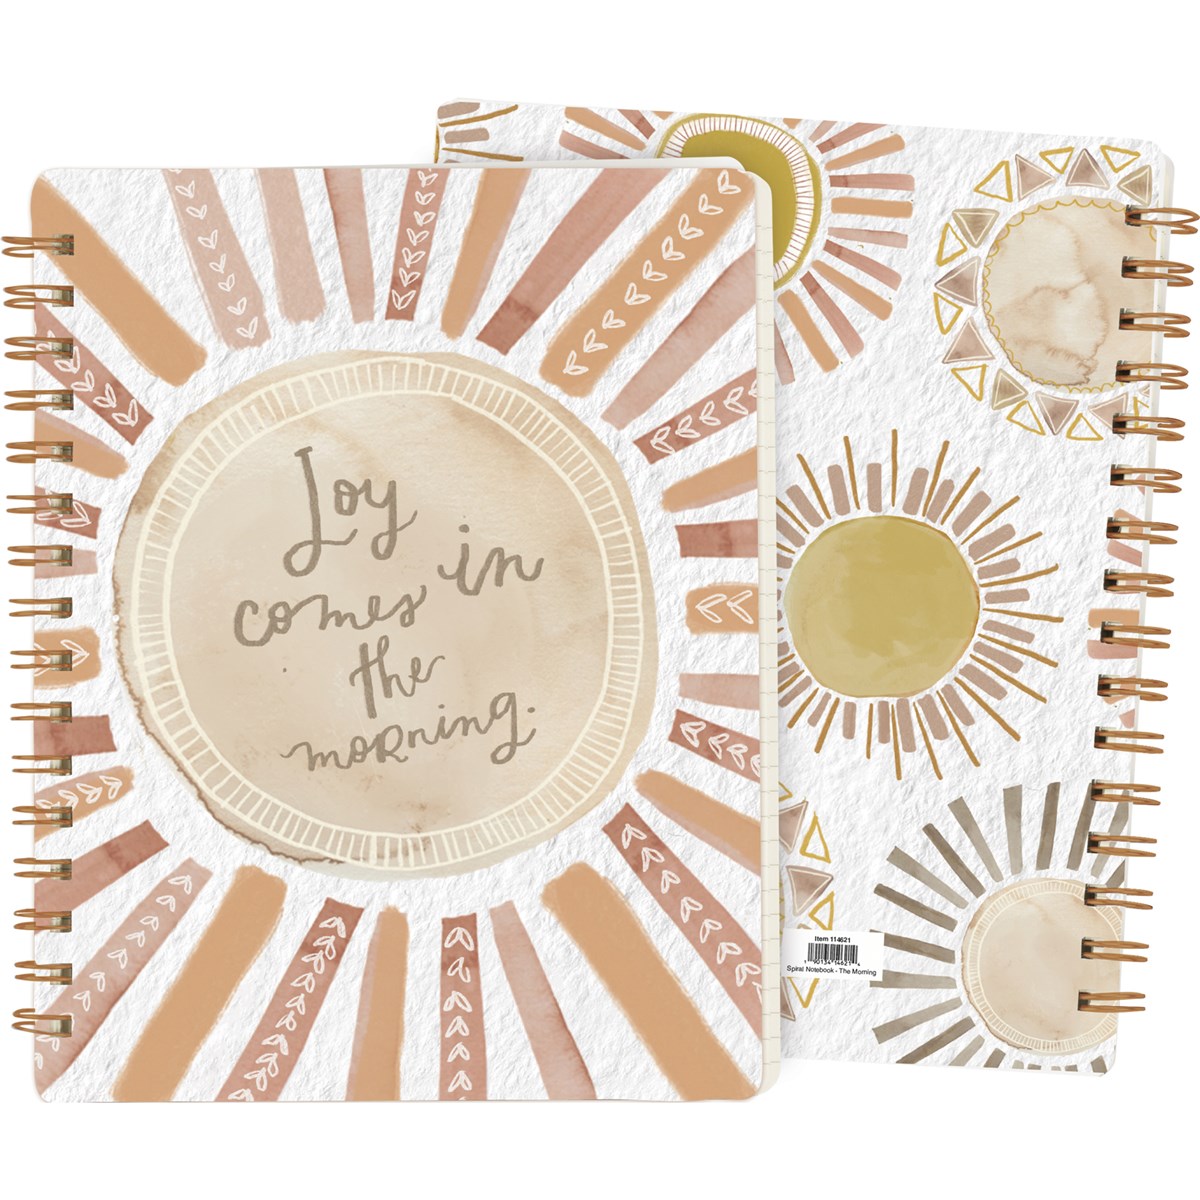 Spiral Notebook - Joy Comes In The Morning - 5.75" x 7.50" x 0.50" - Paper, Metal